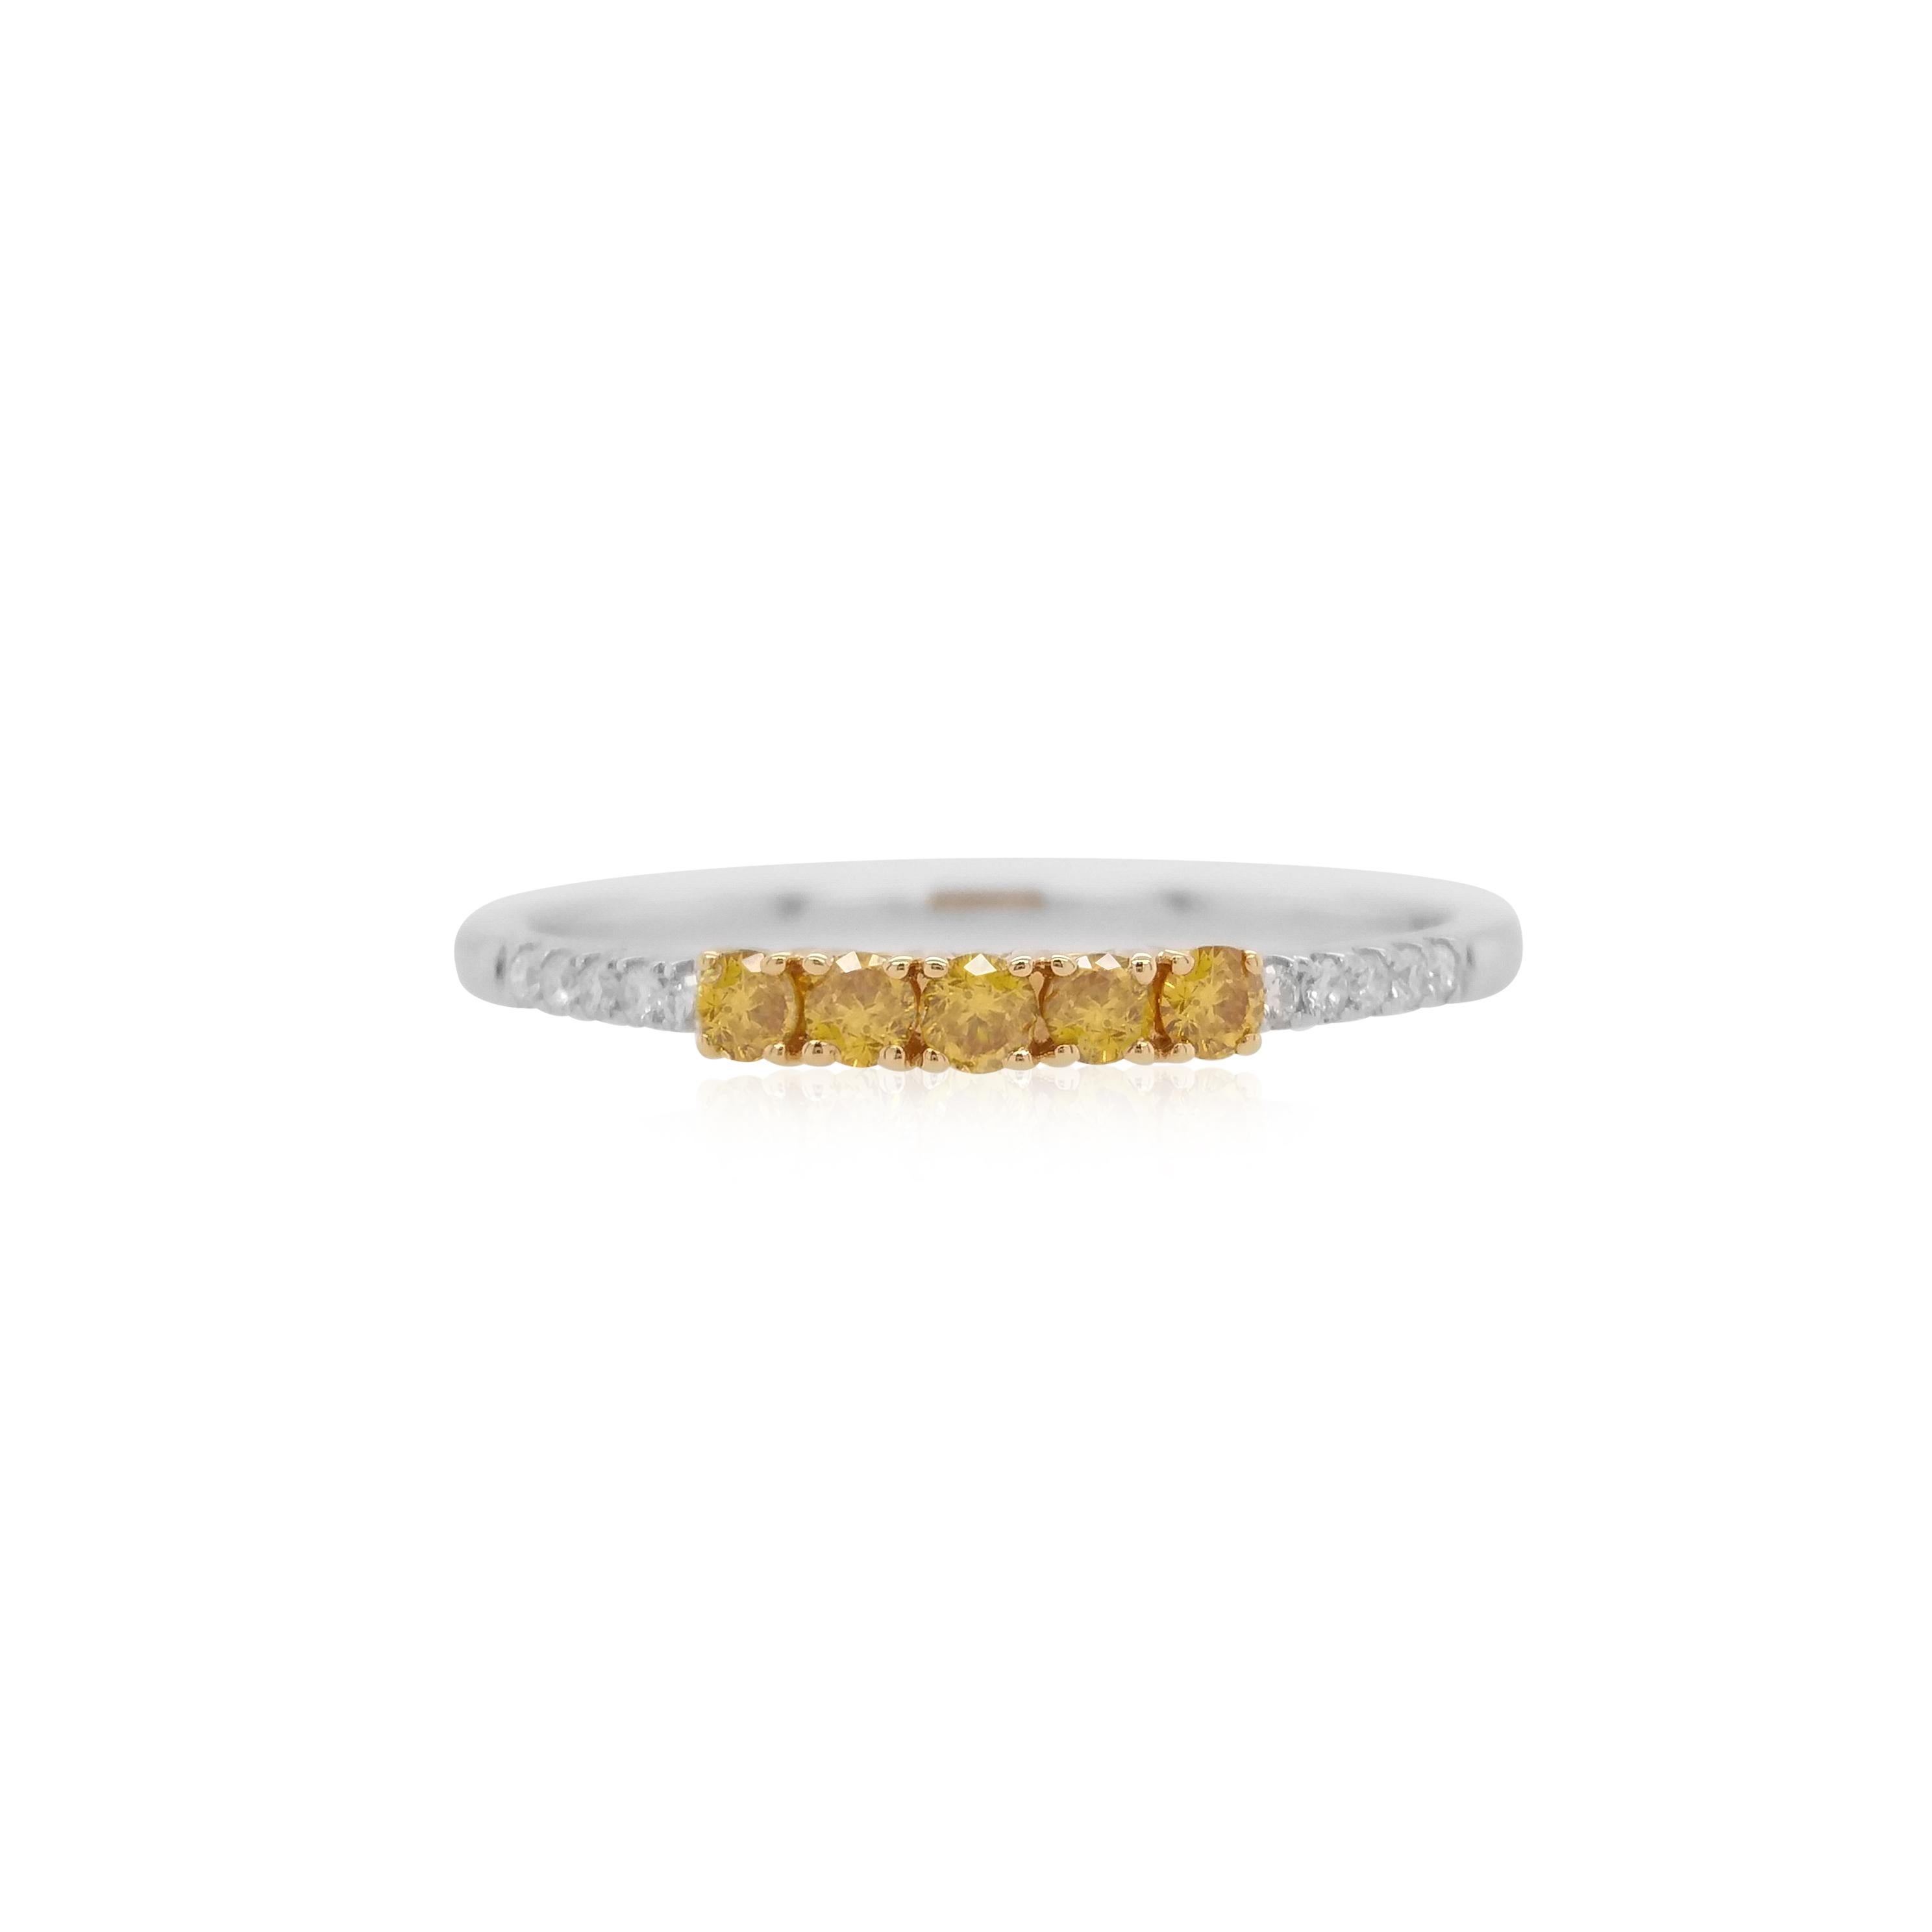 An elegant ring with brilliant cut Yellow diamonds styles with White diamonds set in an 18K gold band.

Yellow Diamonds- 0.160 cts
White Diamonds - 0.05 cts

HYT Jewelry is a privately owned company headquartered in Hong Kong, with branches in